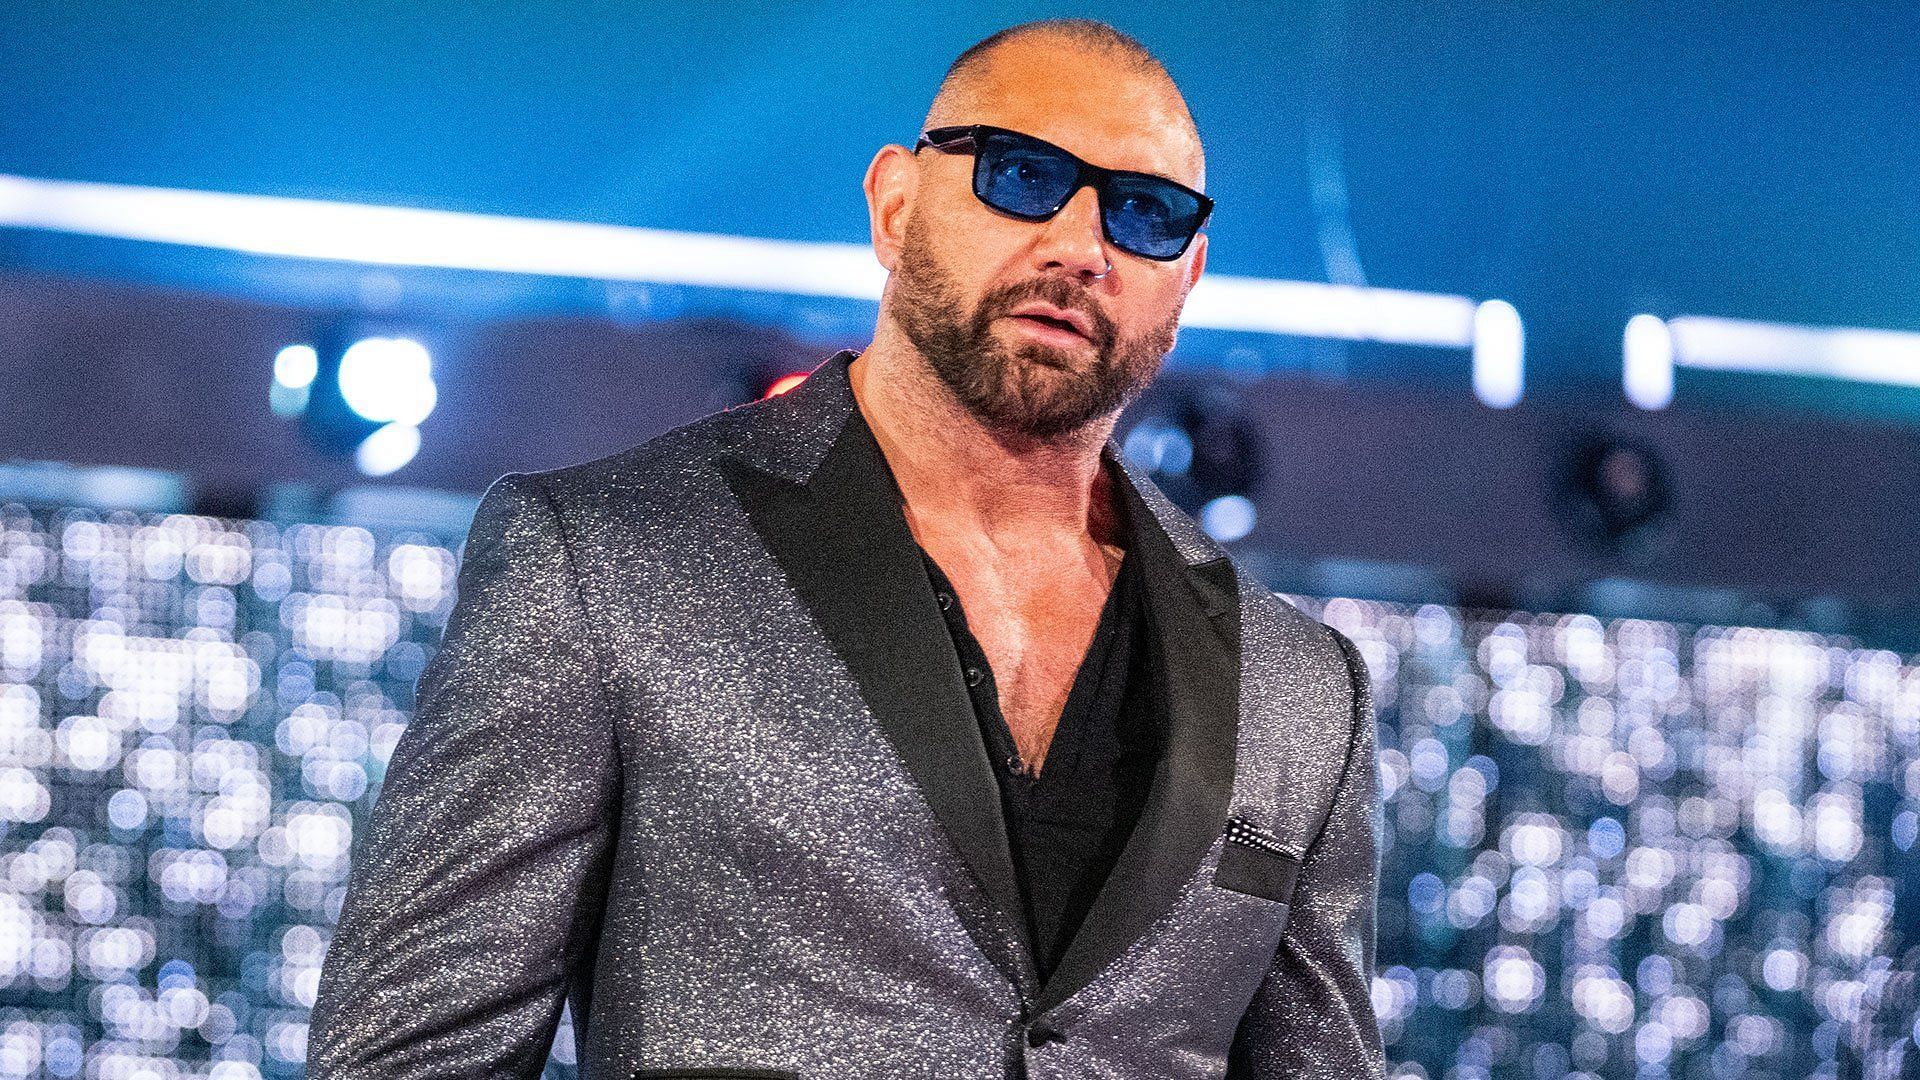 Batista has had a great career in Hollywood since leaving WWE.